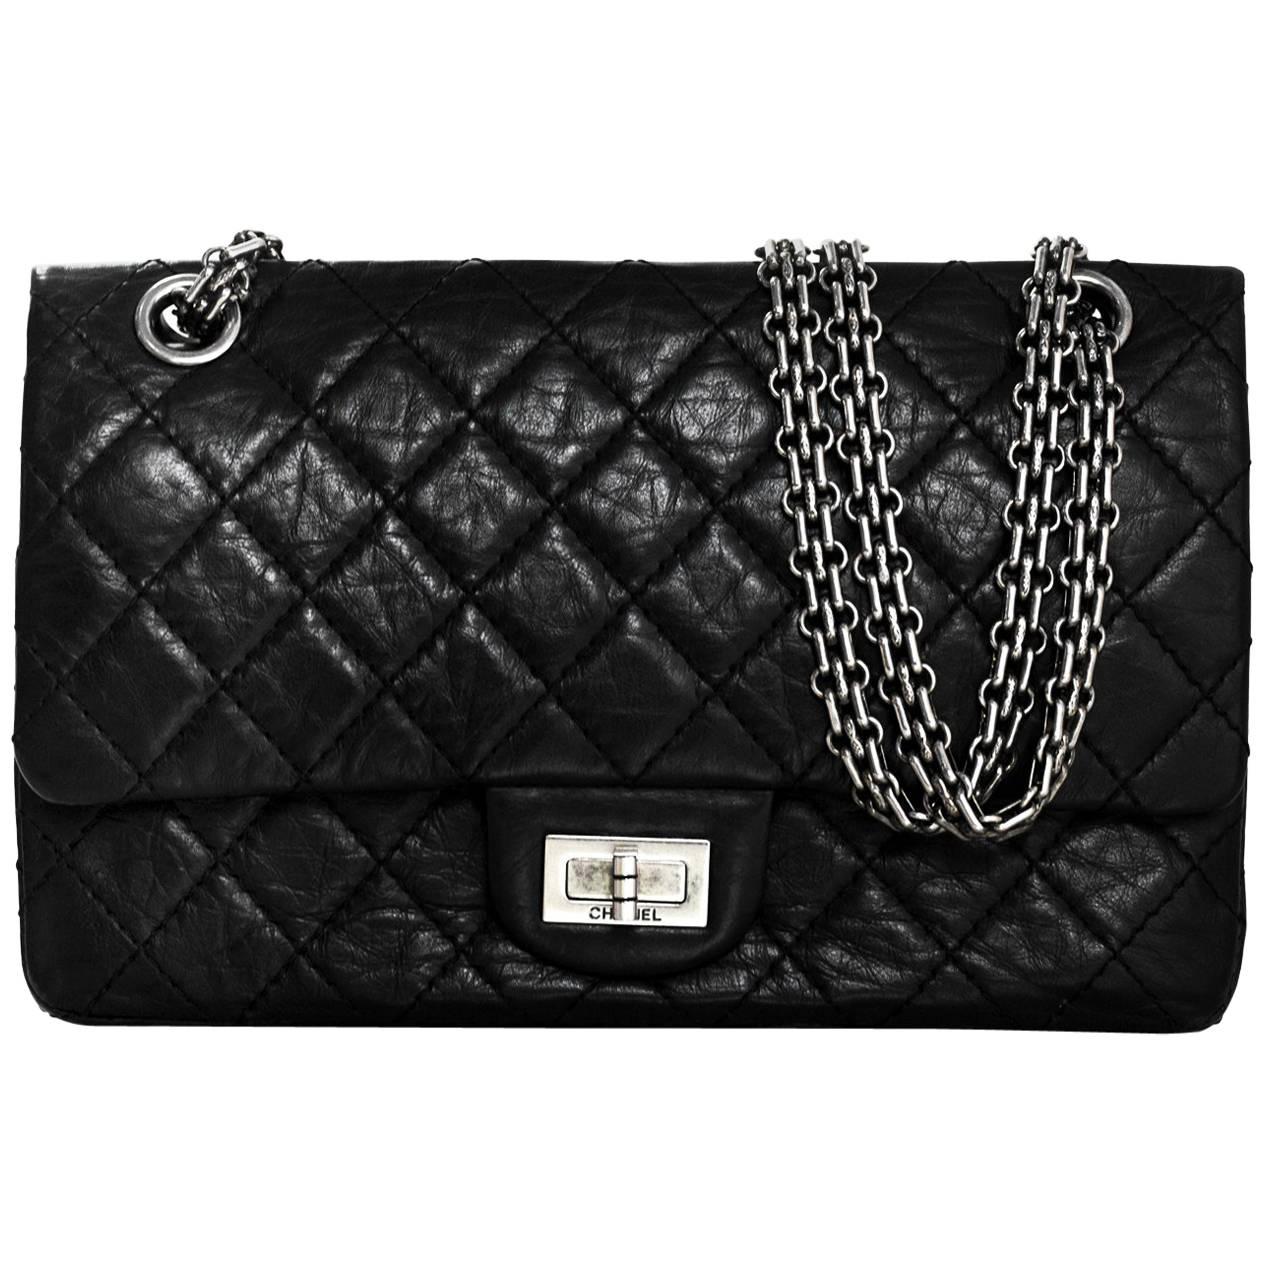 Chanel Black Distressed Calfskin Reissue 2.55 Double Flap Bag with DB